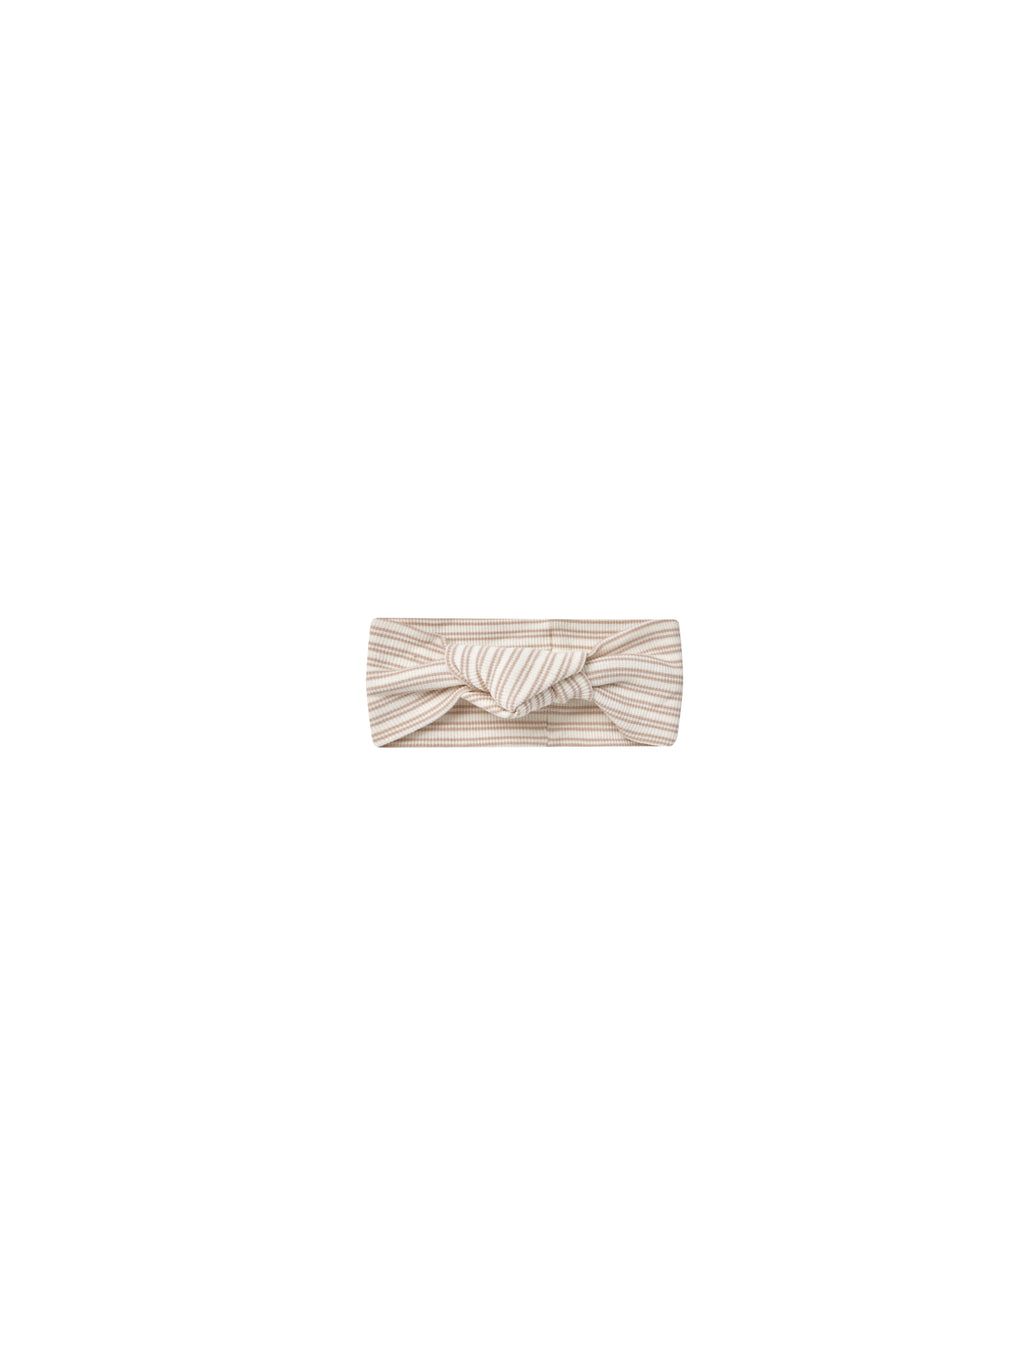 Quincy Mae Ribbed Knotted Headband - Oat Stripe